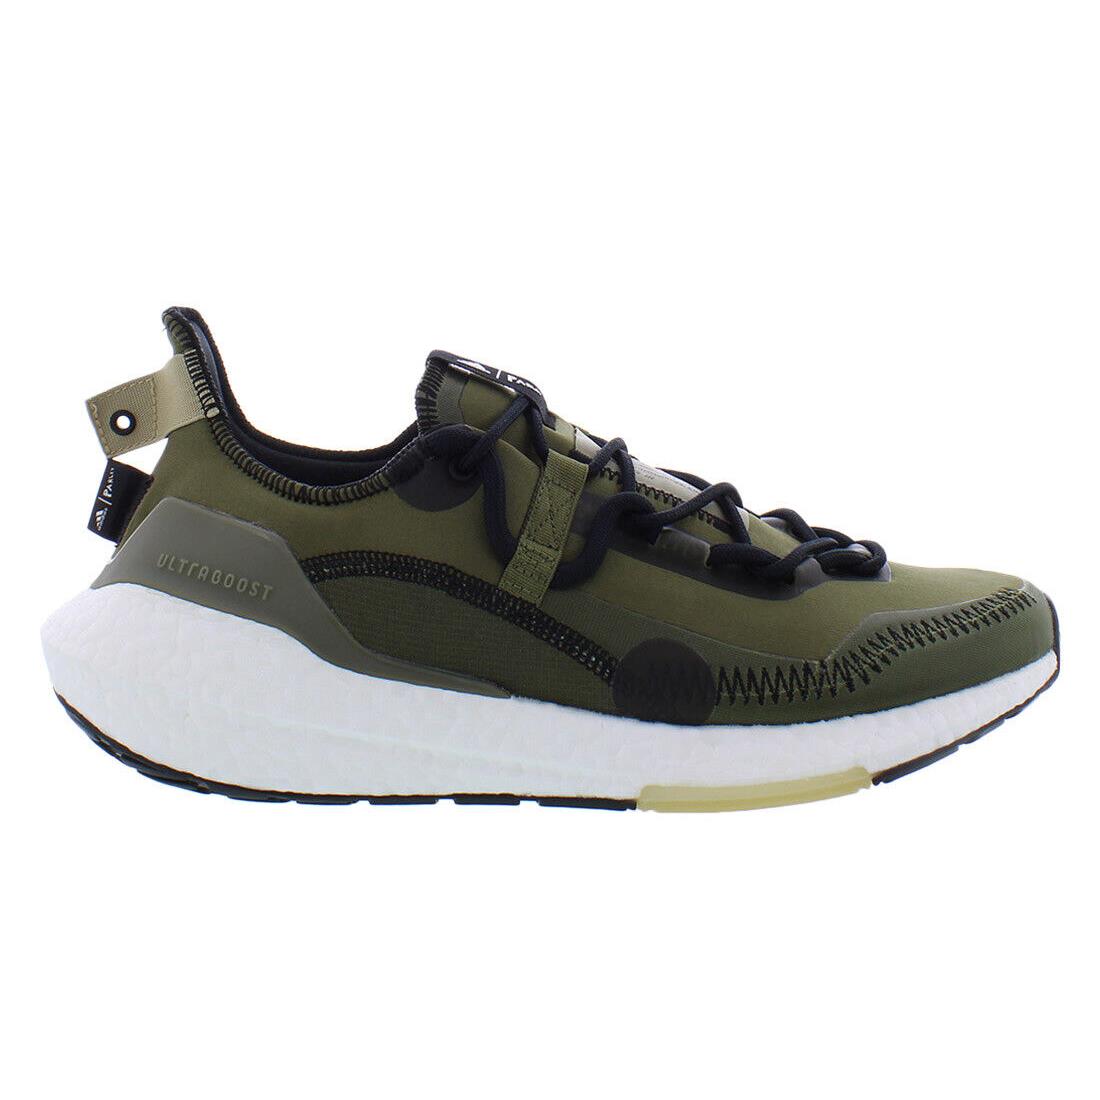 Adidas Ultraboost 21 X Parley Unisex Shoes - Olive/Black, Main: Green